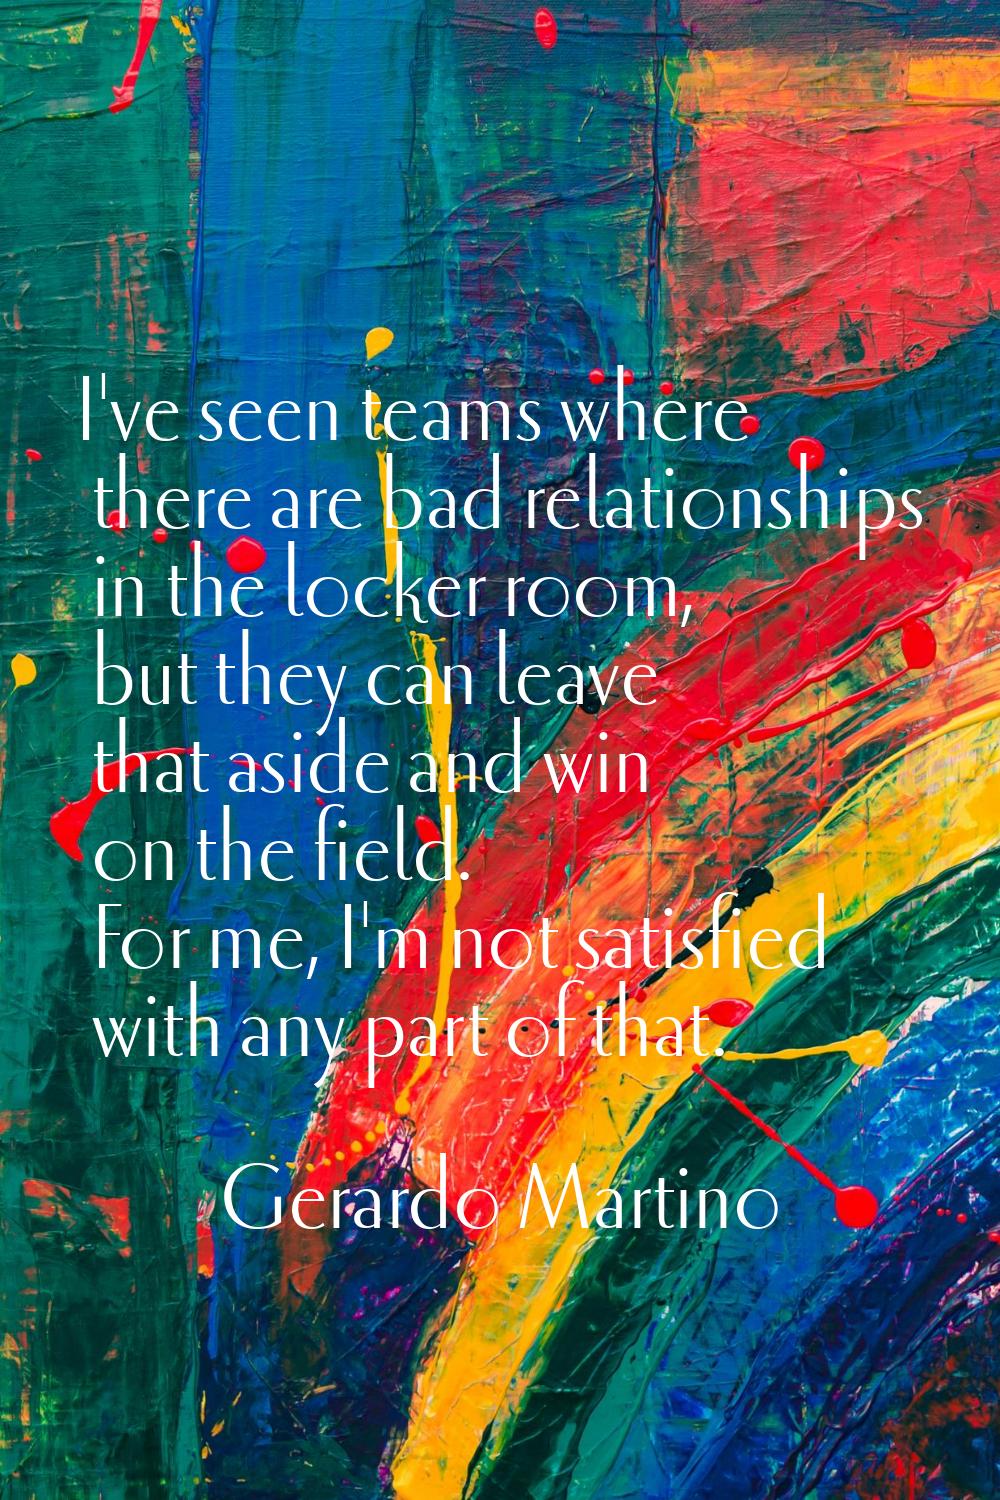 I've seen teams where there are bad relationships in the locker room, but they can leave that aside